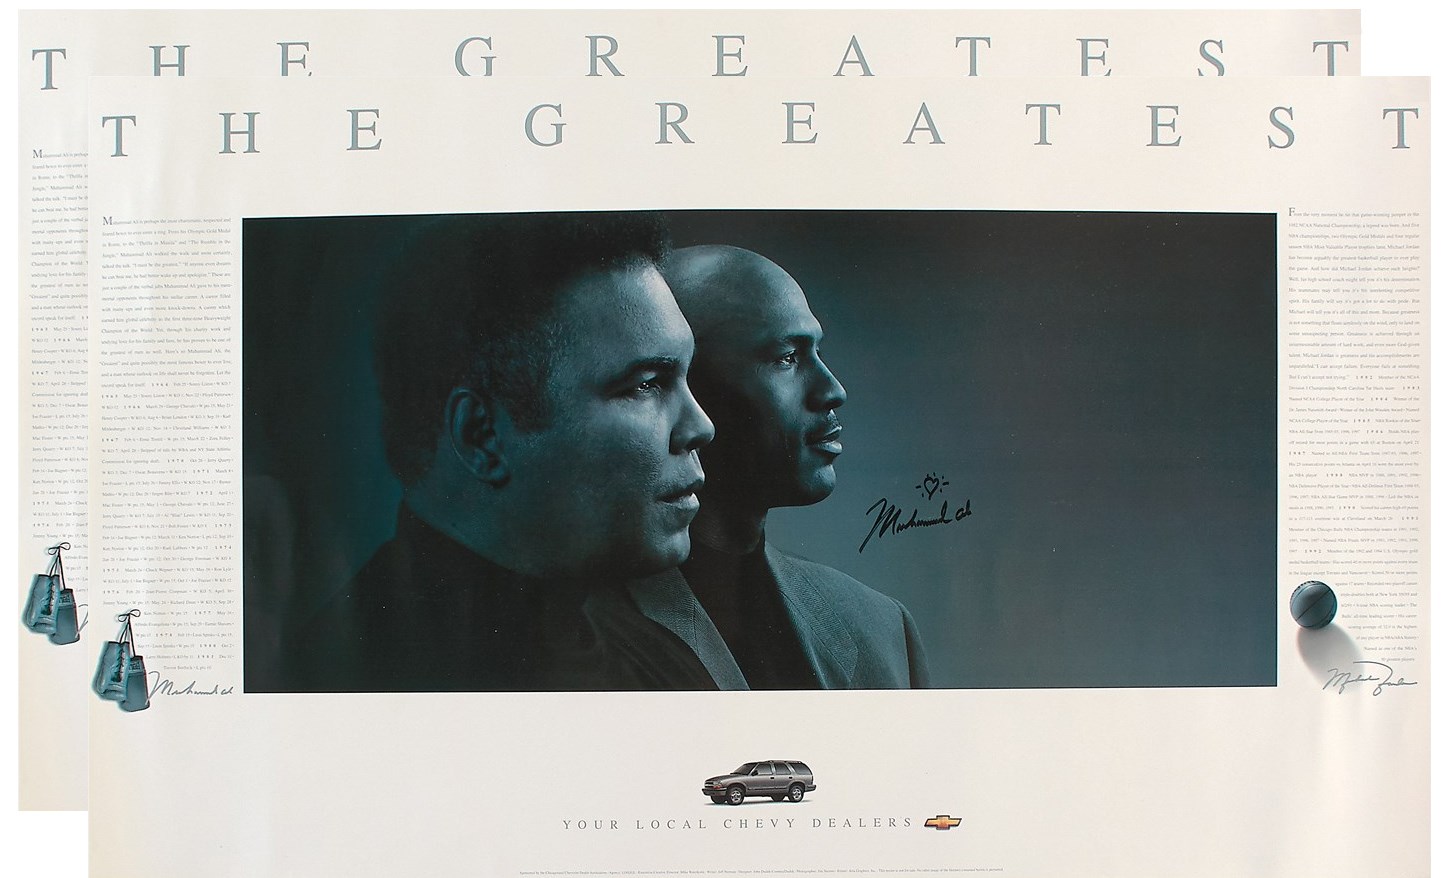 Muhammad Ali & Boxing - Muhammad Ali Signed "The Greatest" Posters with Heart Sketch (2)